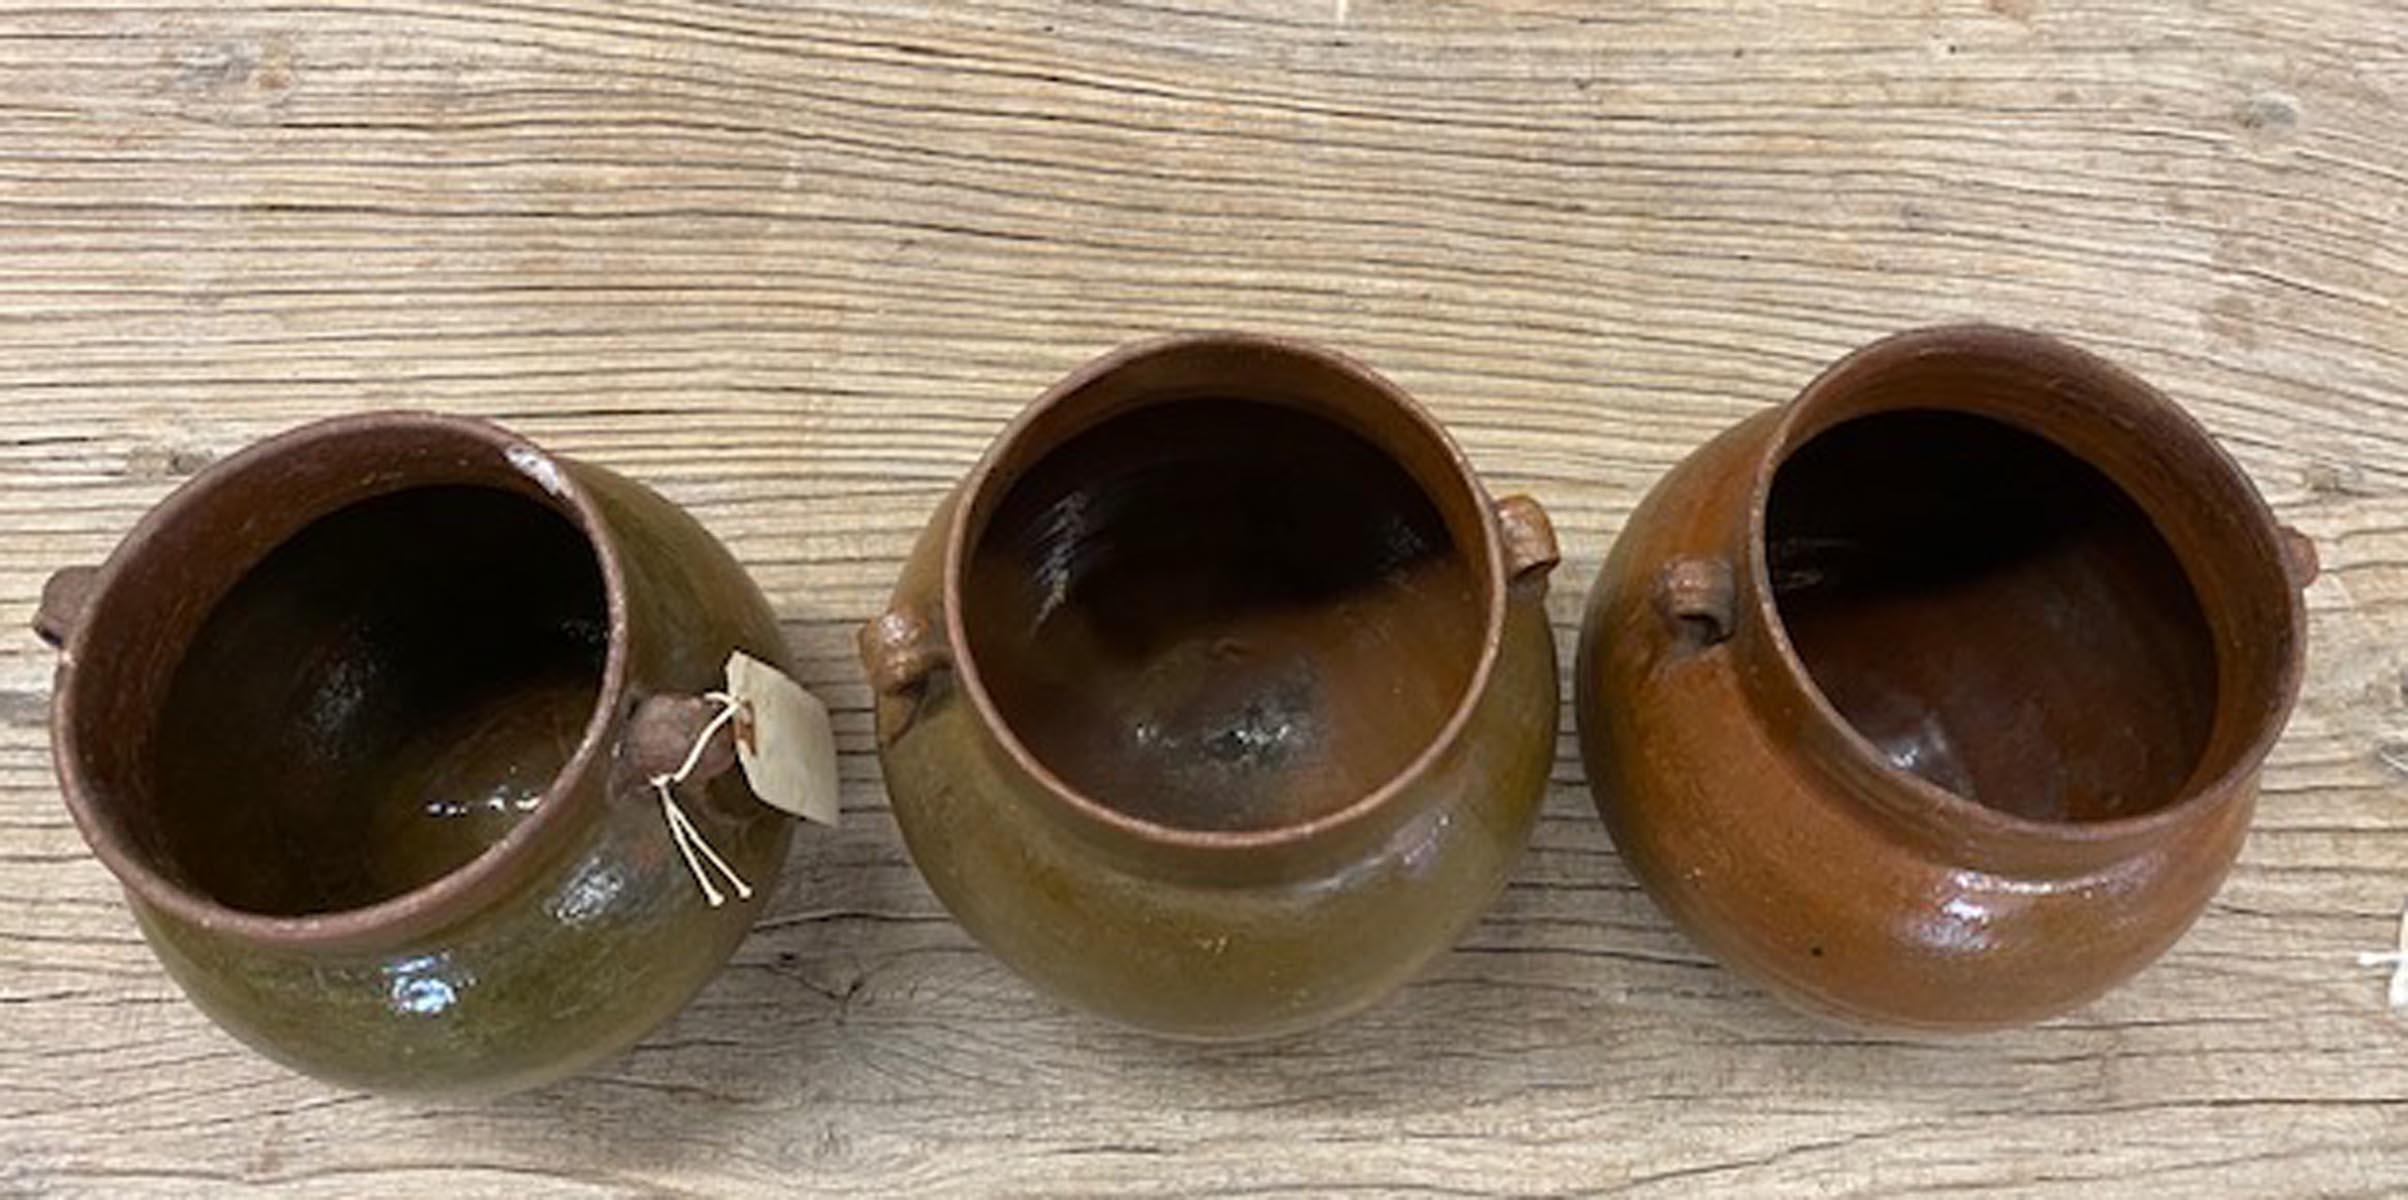 Three Guatemalan antique glazed ceramic jars, sold separately. Please refer to left, middle or right when purchasing
Left measures 6.5 D x 7 H
Middle: 7 D x 7.5 H
Right: 6.5 D x 7.5 H.